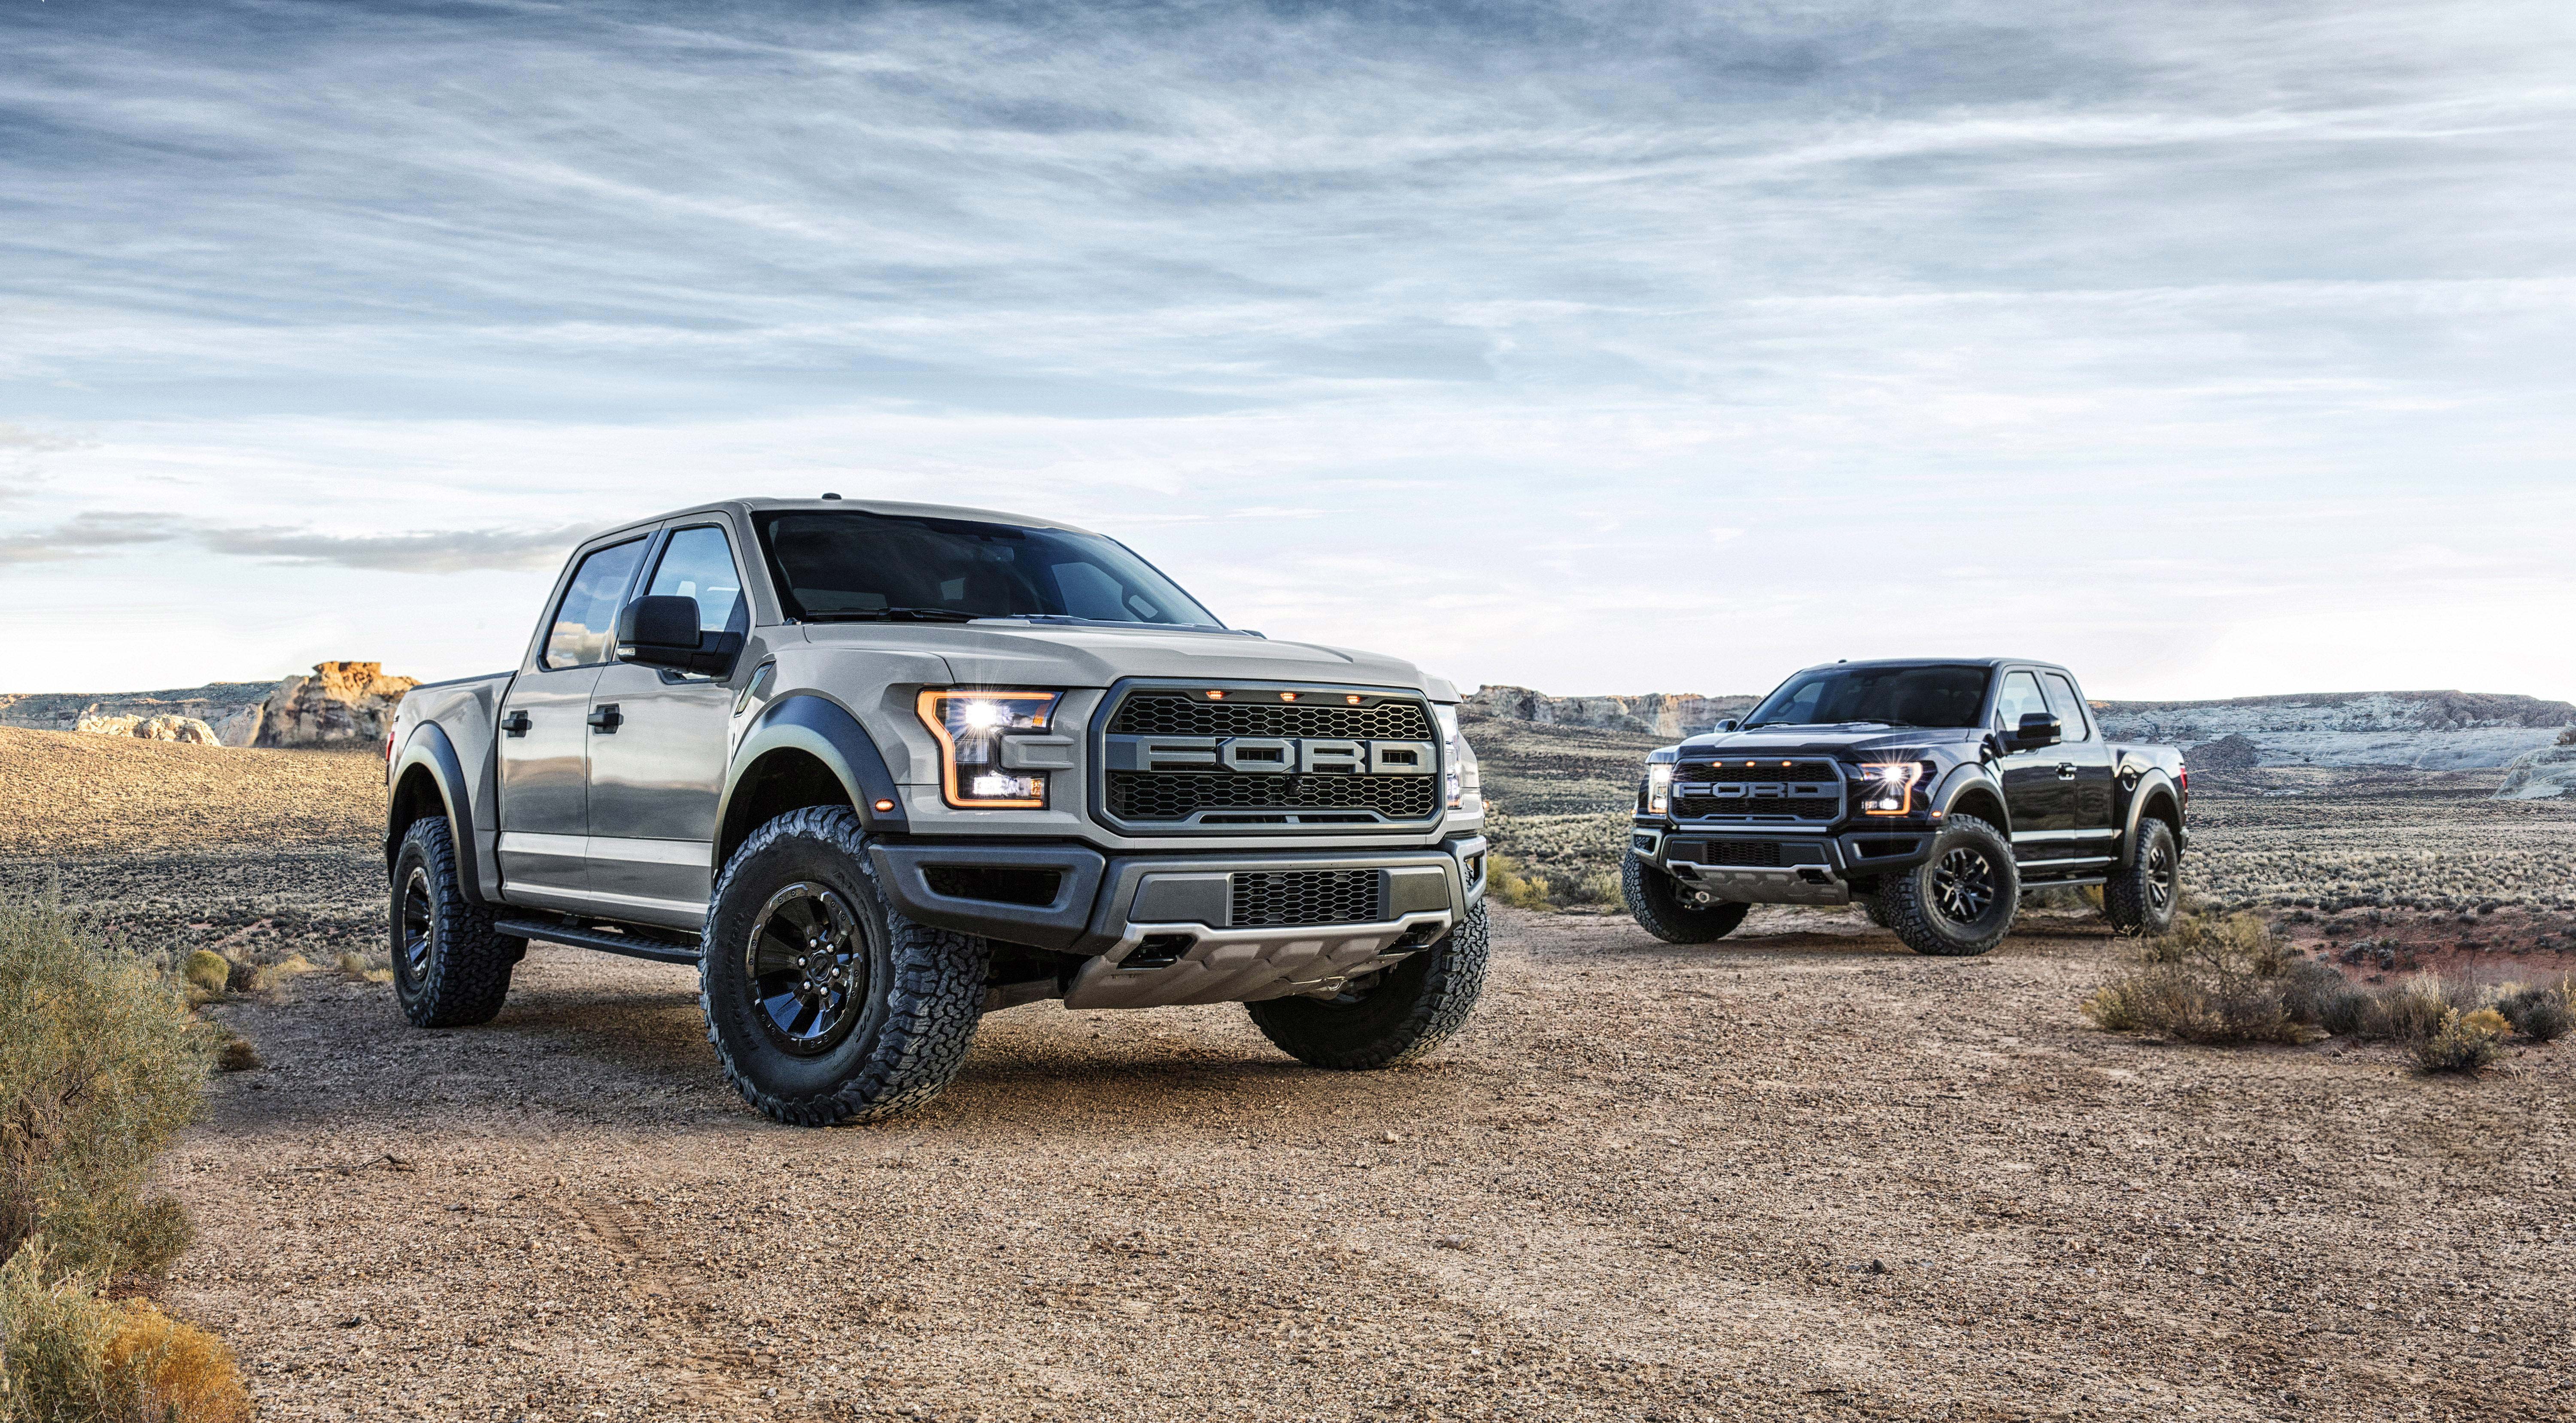 Ford F150 Raptor, Hd Cars, 4k Wallpapers, Images, Backgrounds, Photos 7E0